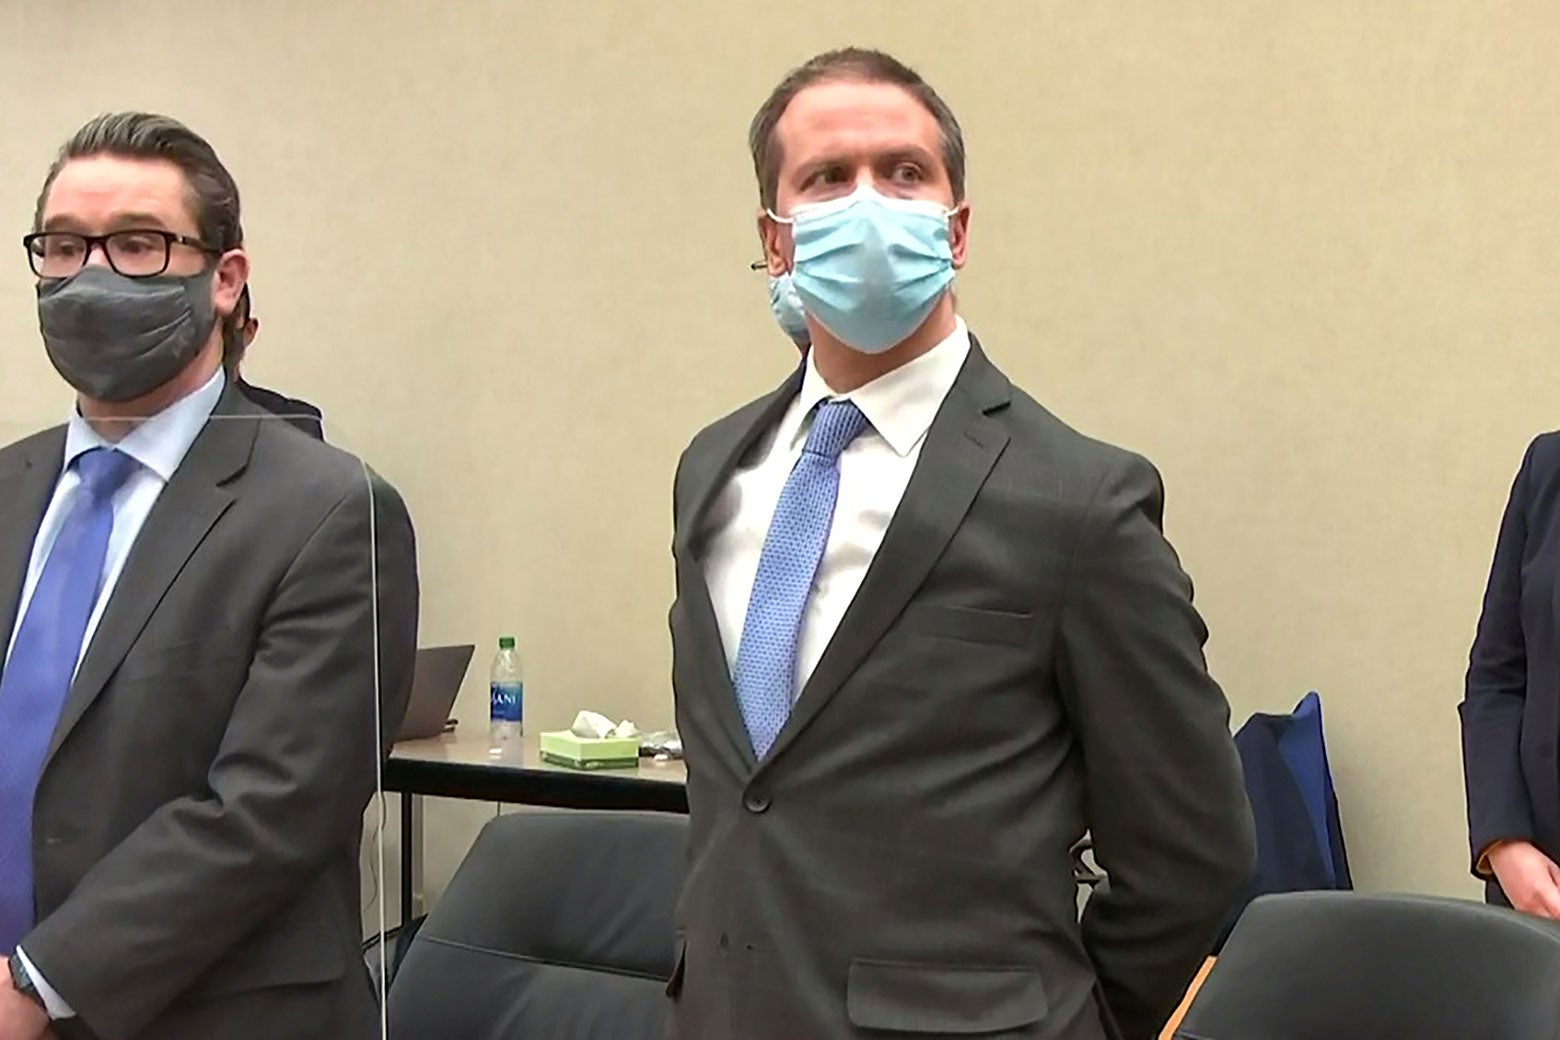 Derek Chauvin stands and looks toward the judge while wearing a mask and a suit with his hands behind his back